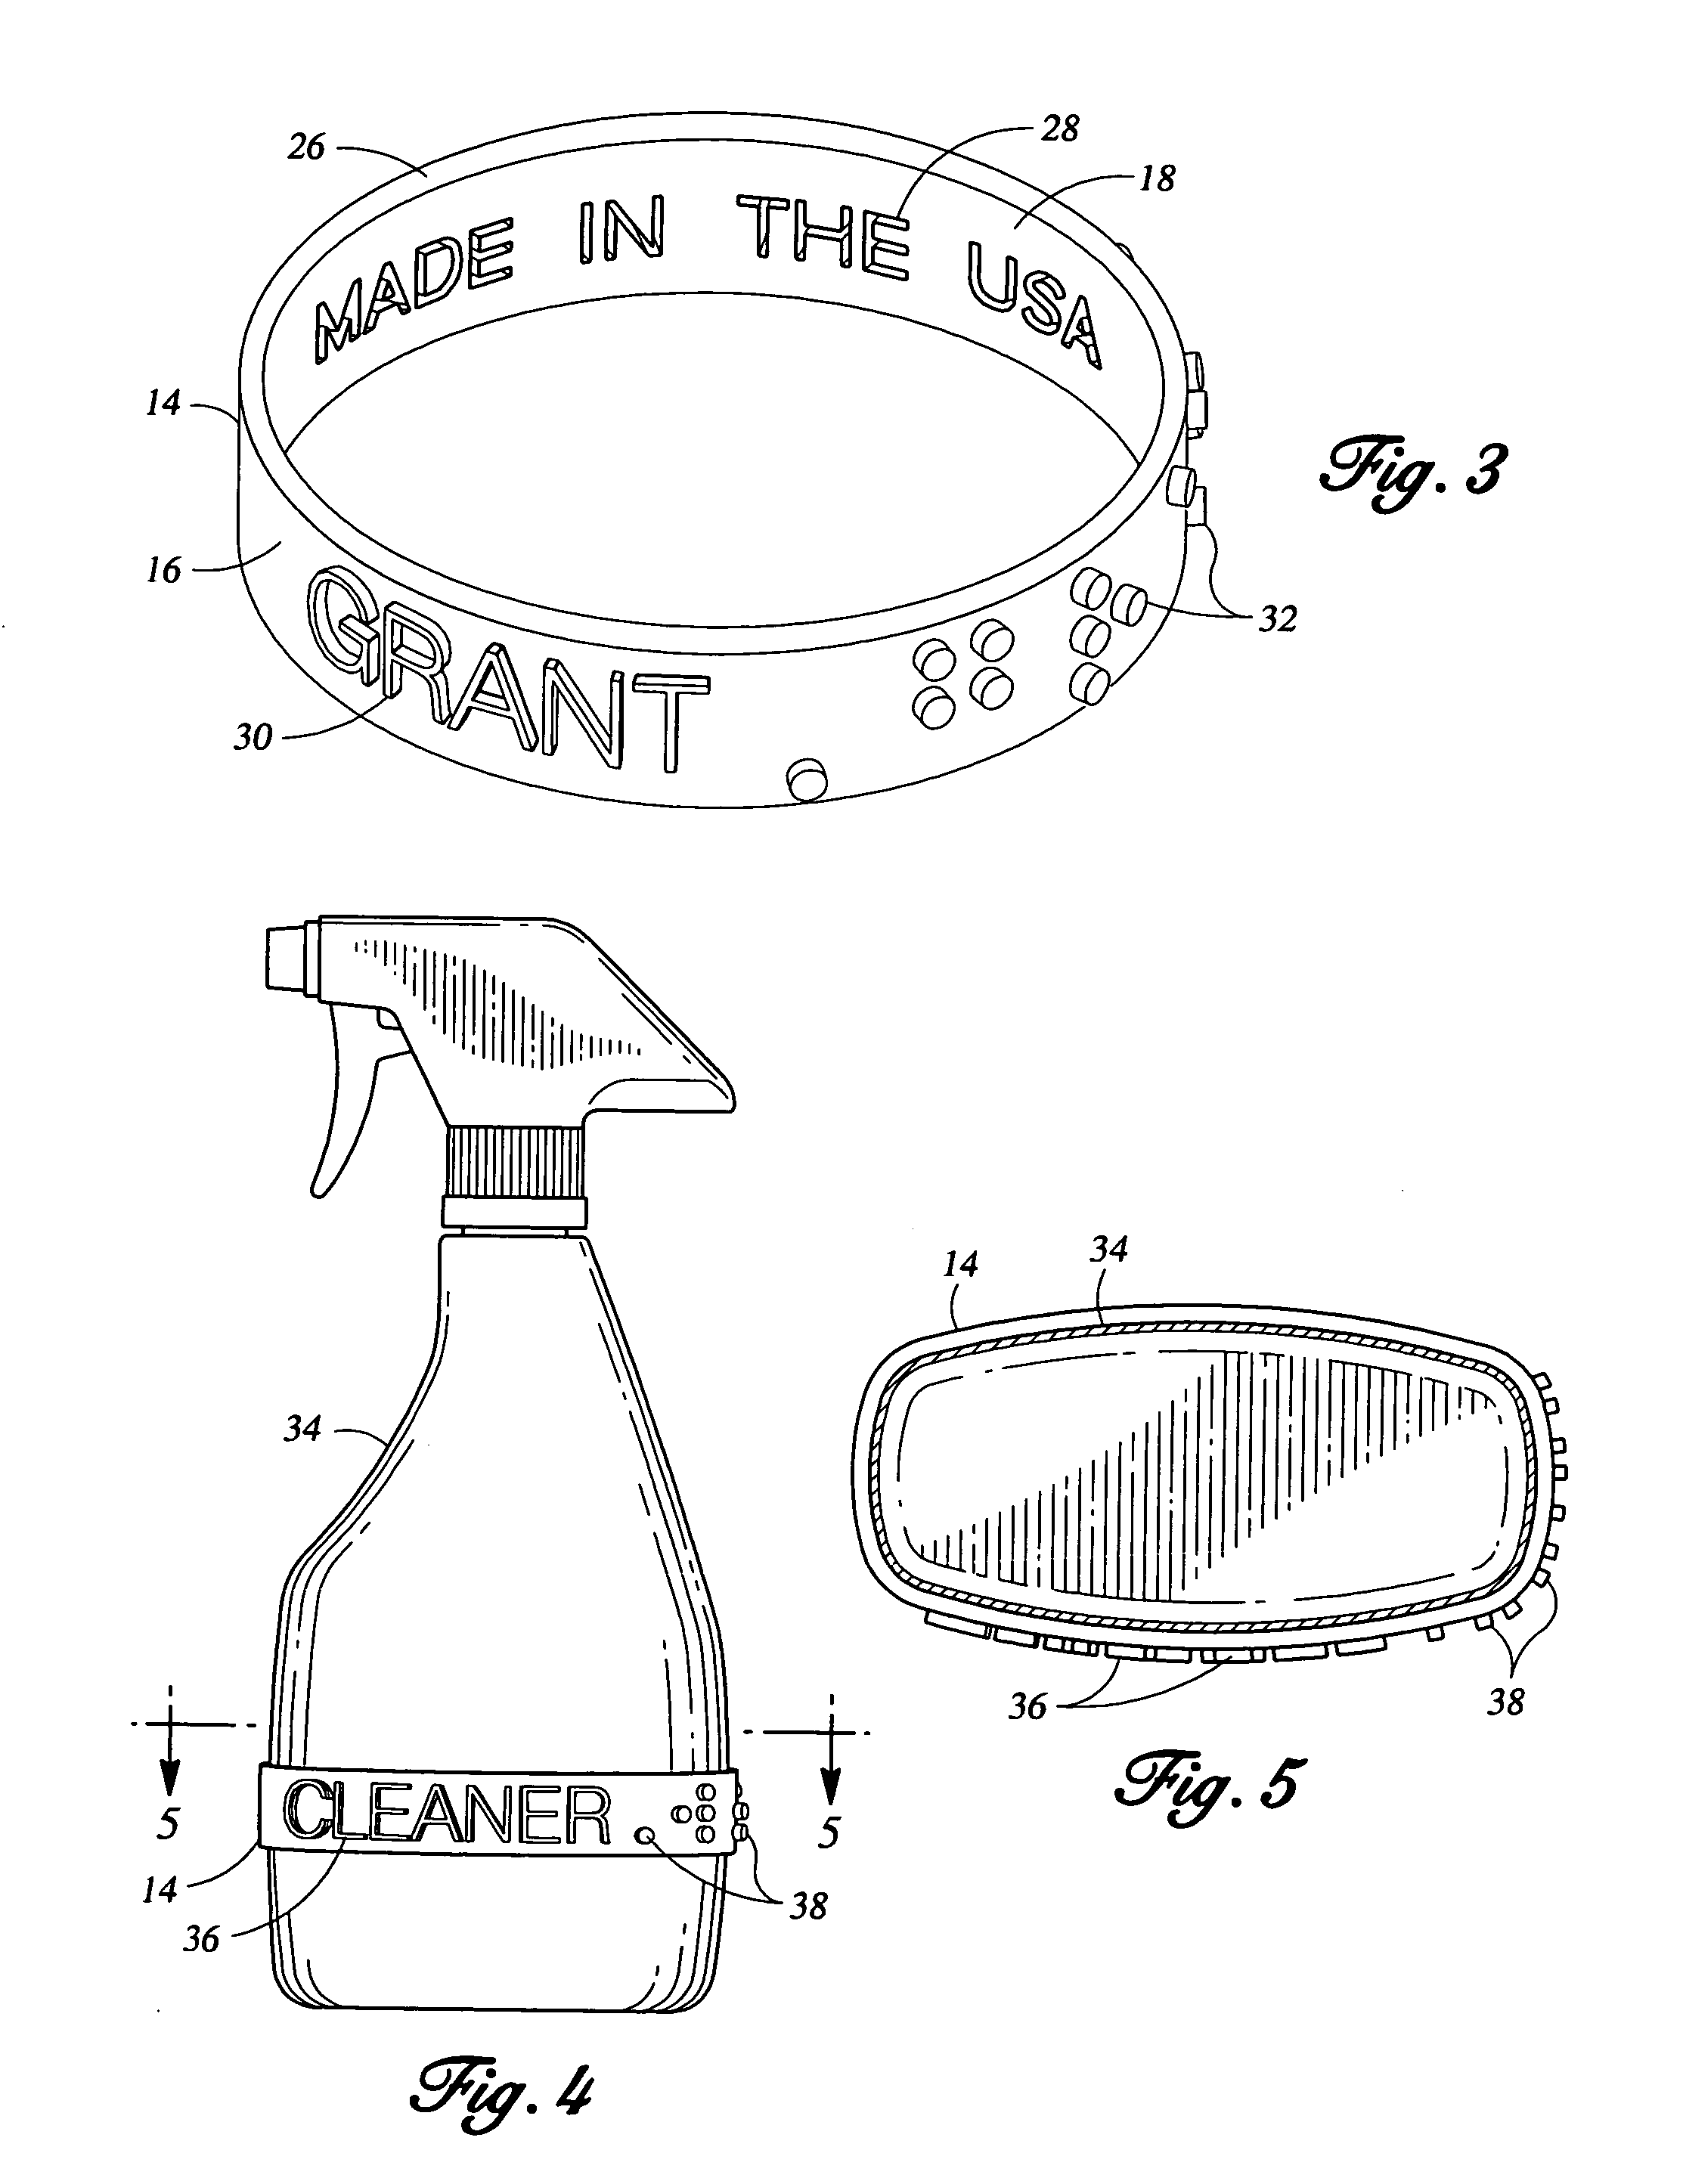 Device and method for identifying containers personal to sighted and visually handicapped individuals